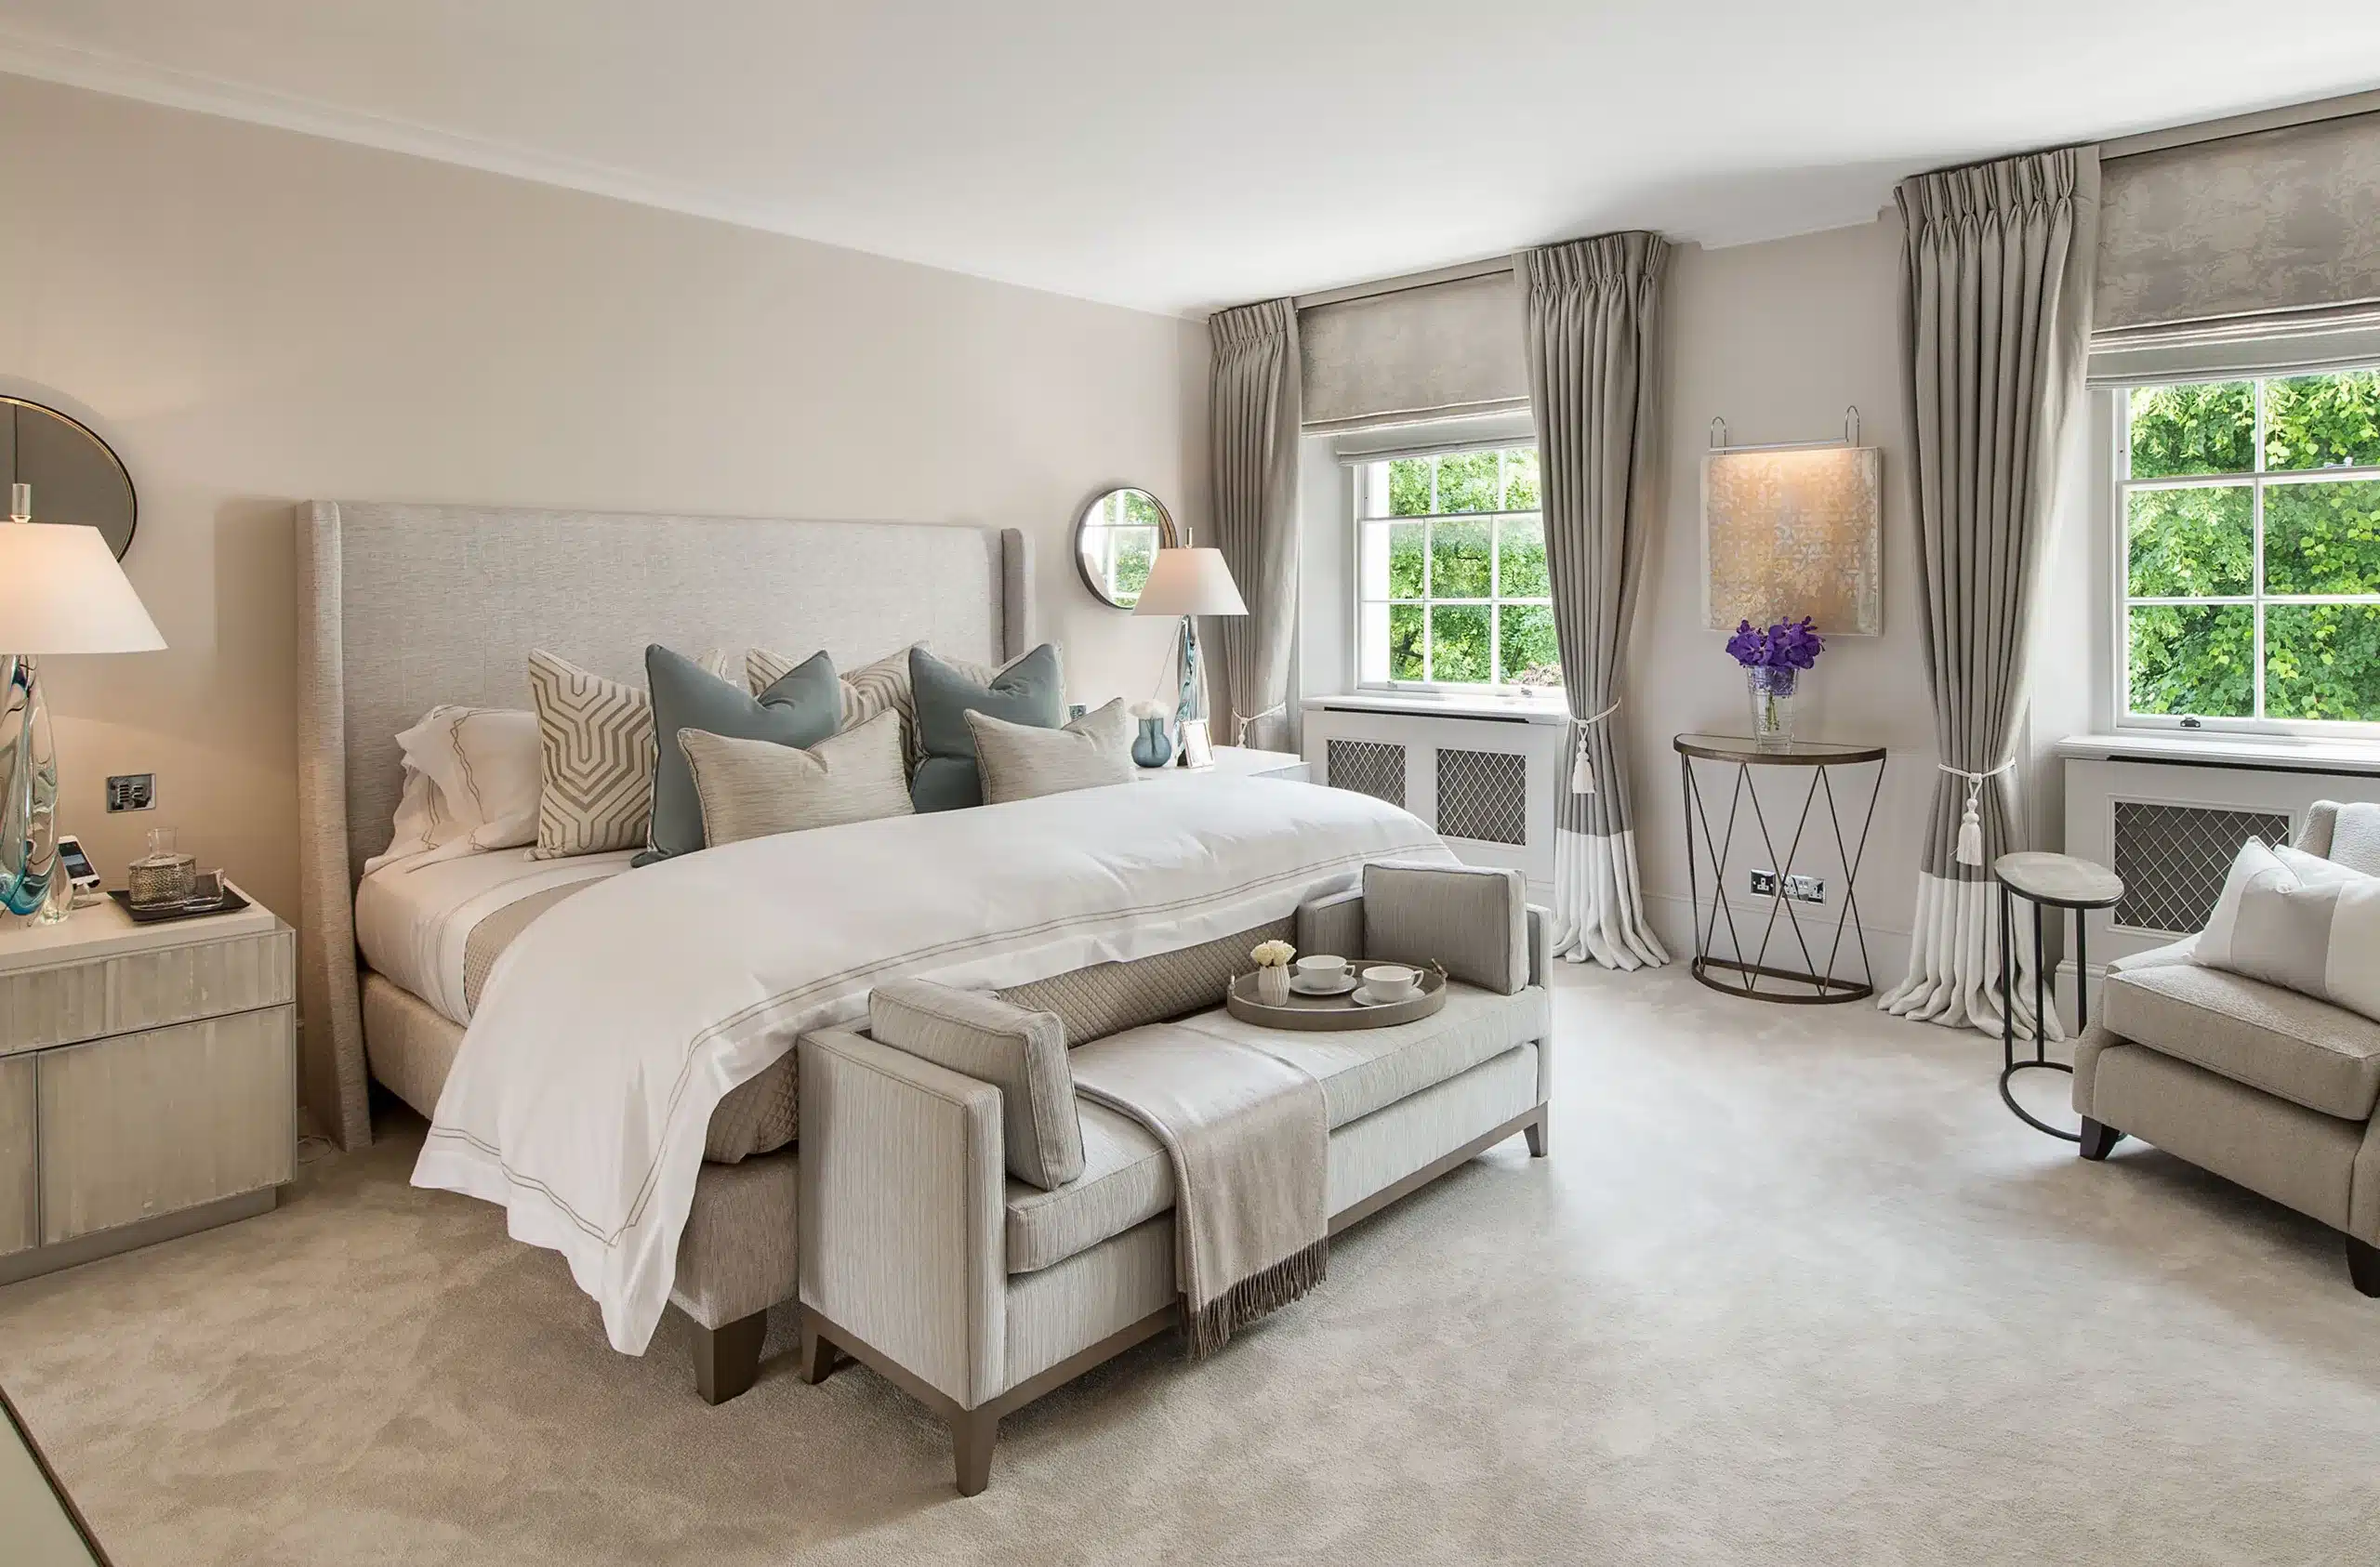 A luxury master bedroom done in contemporary neutral tones by interior design studio katharine pooley